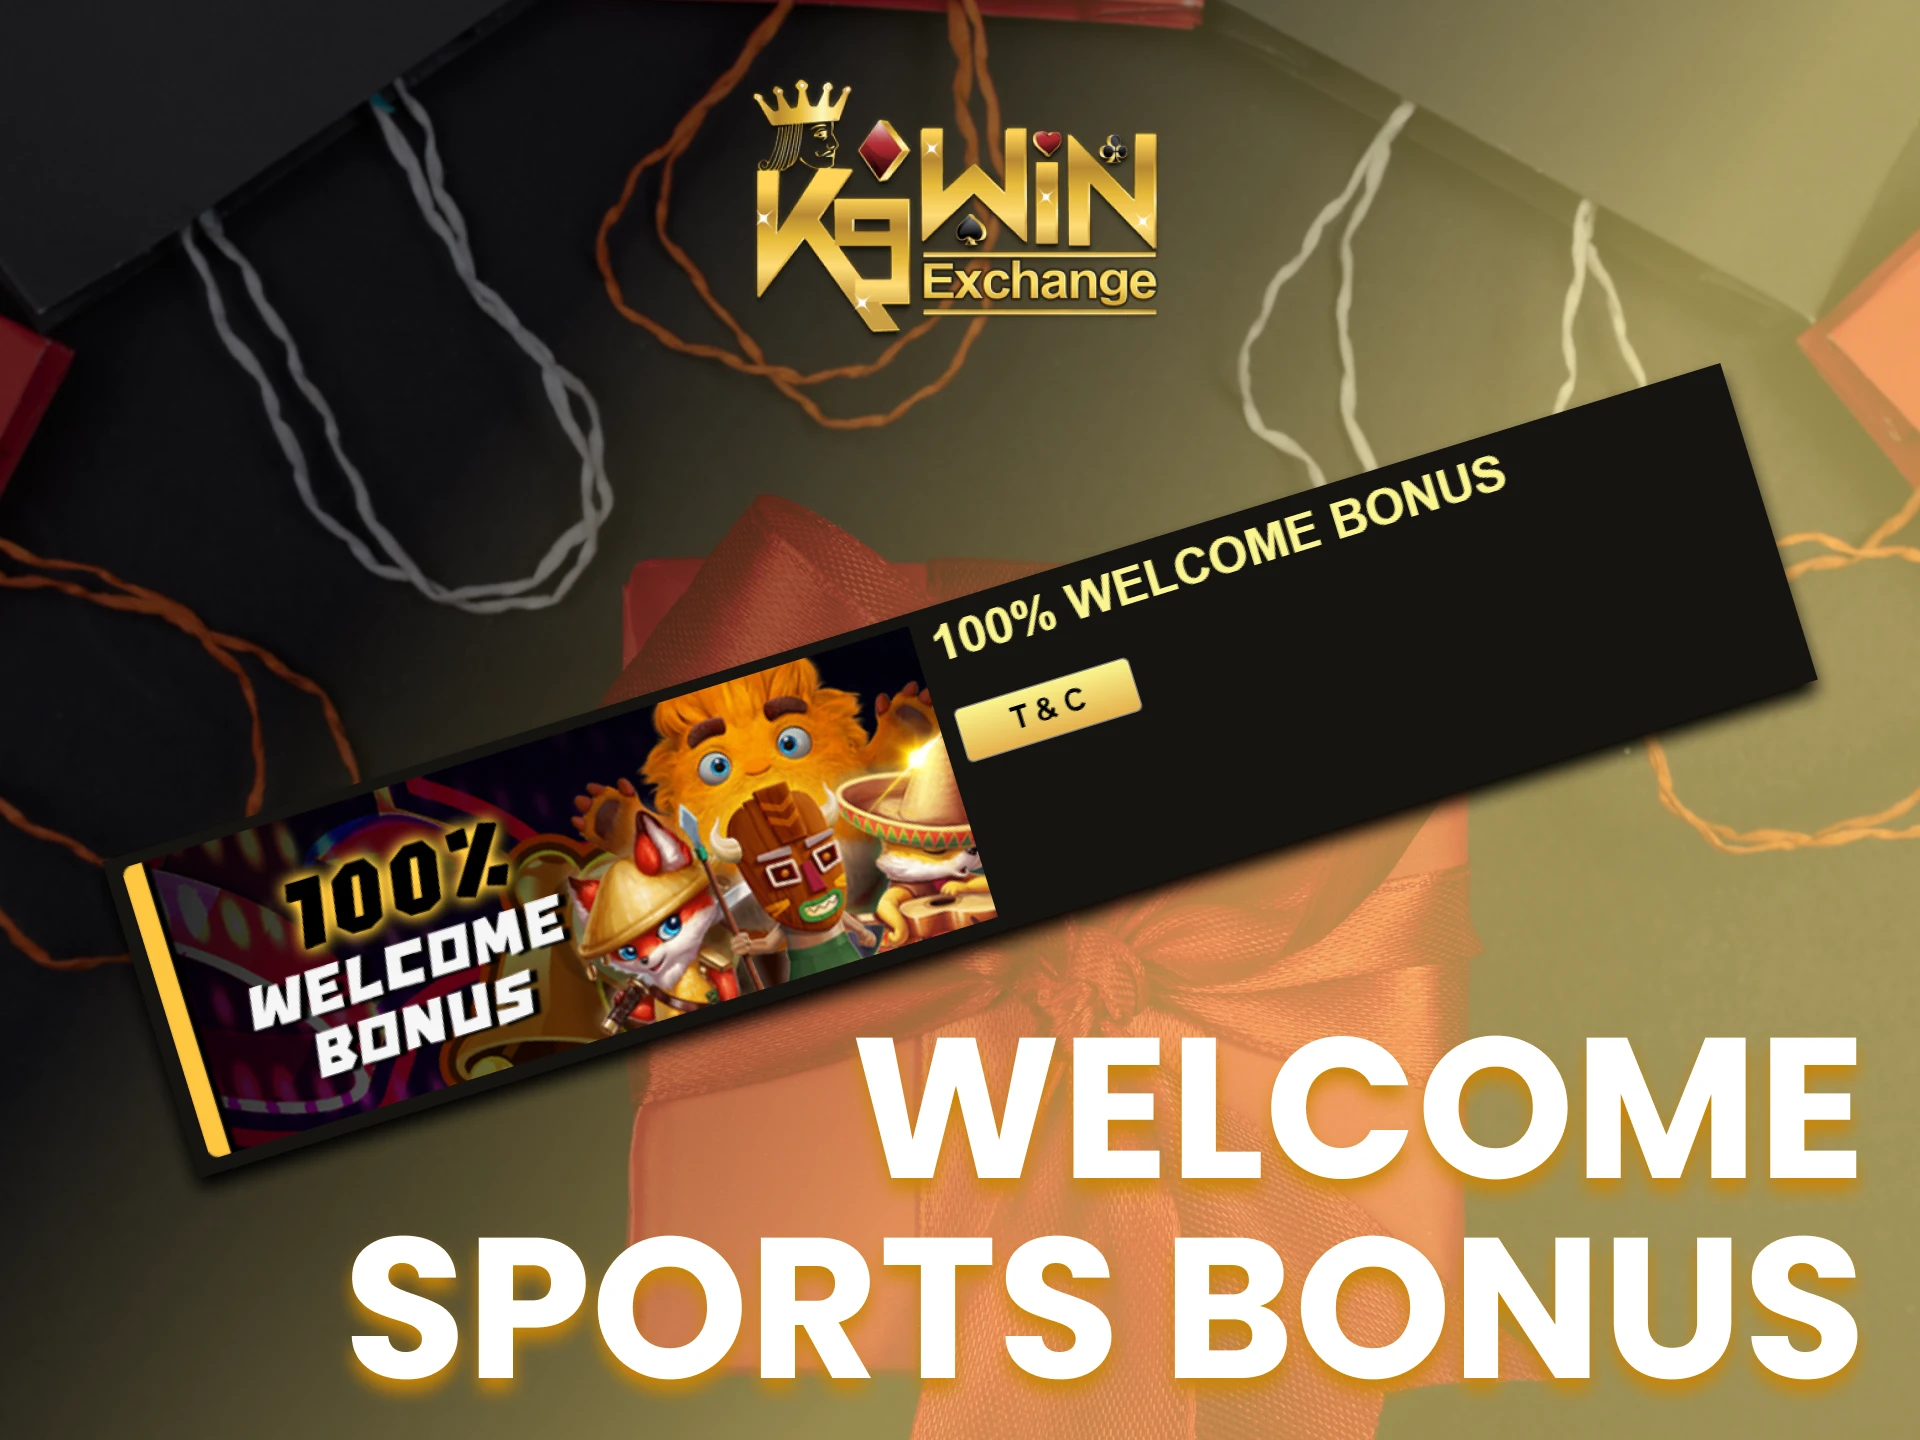 Bet on sports in the K9Win app and get the sports bonus.